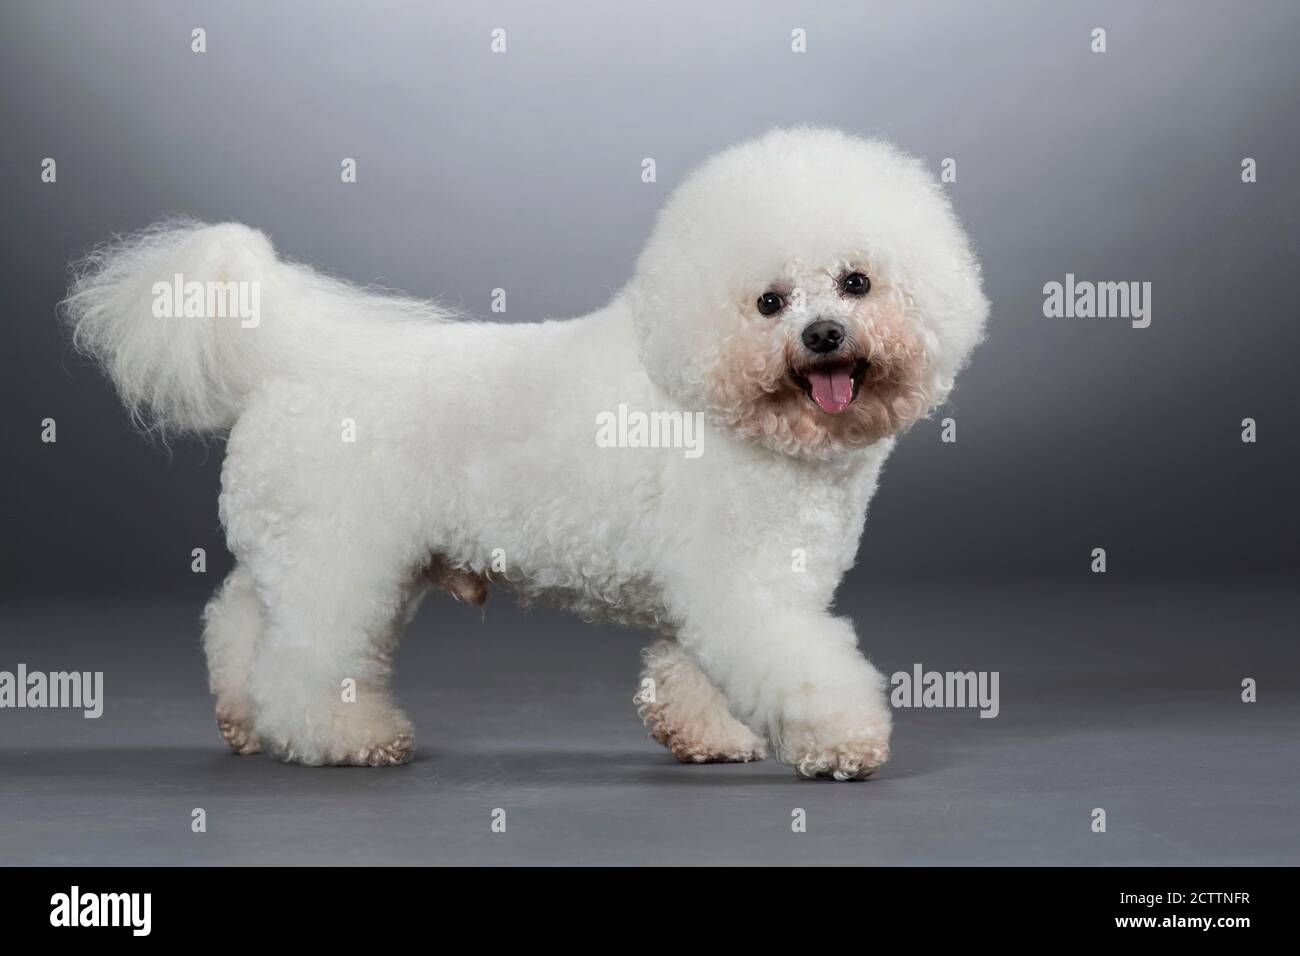 Bichon Frise. Adult dog walking. Studio picture against a grey background. Stock Photo